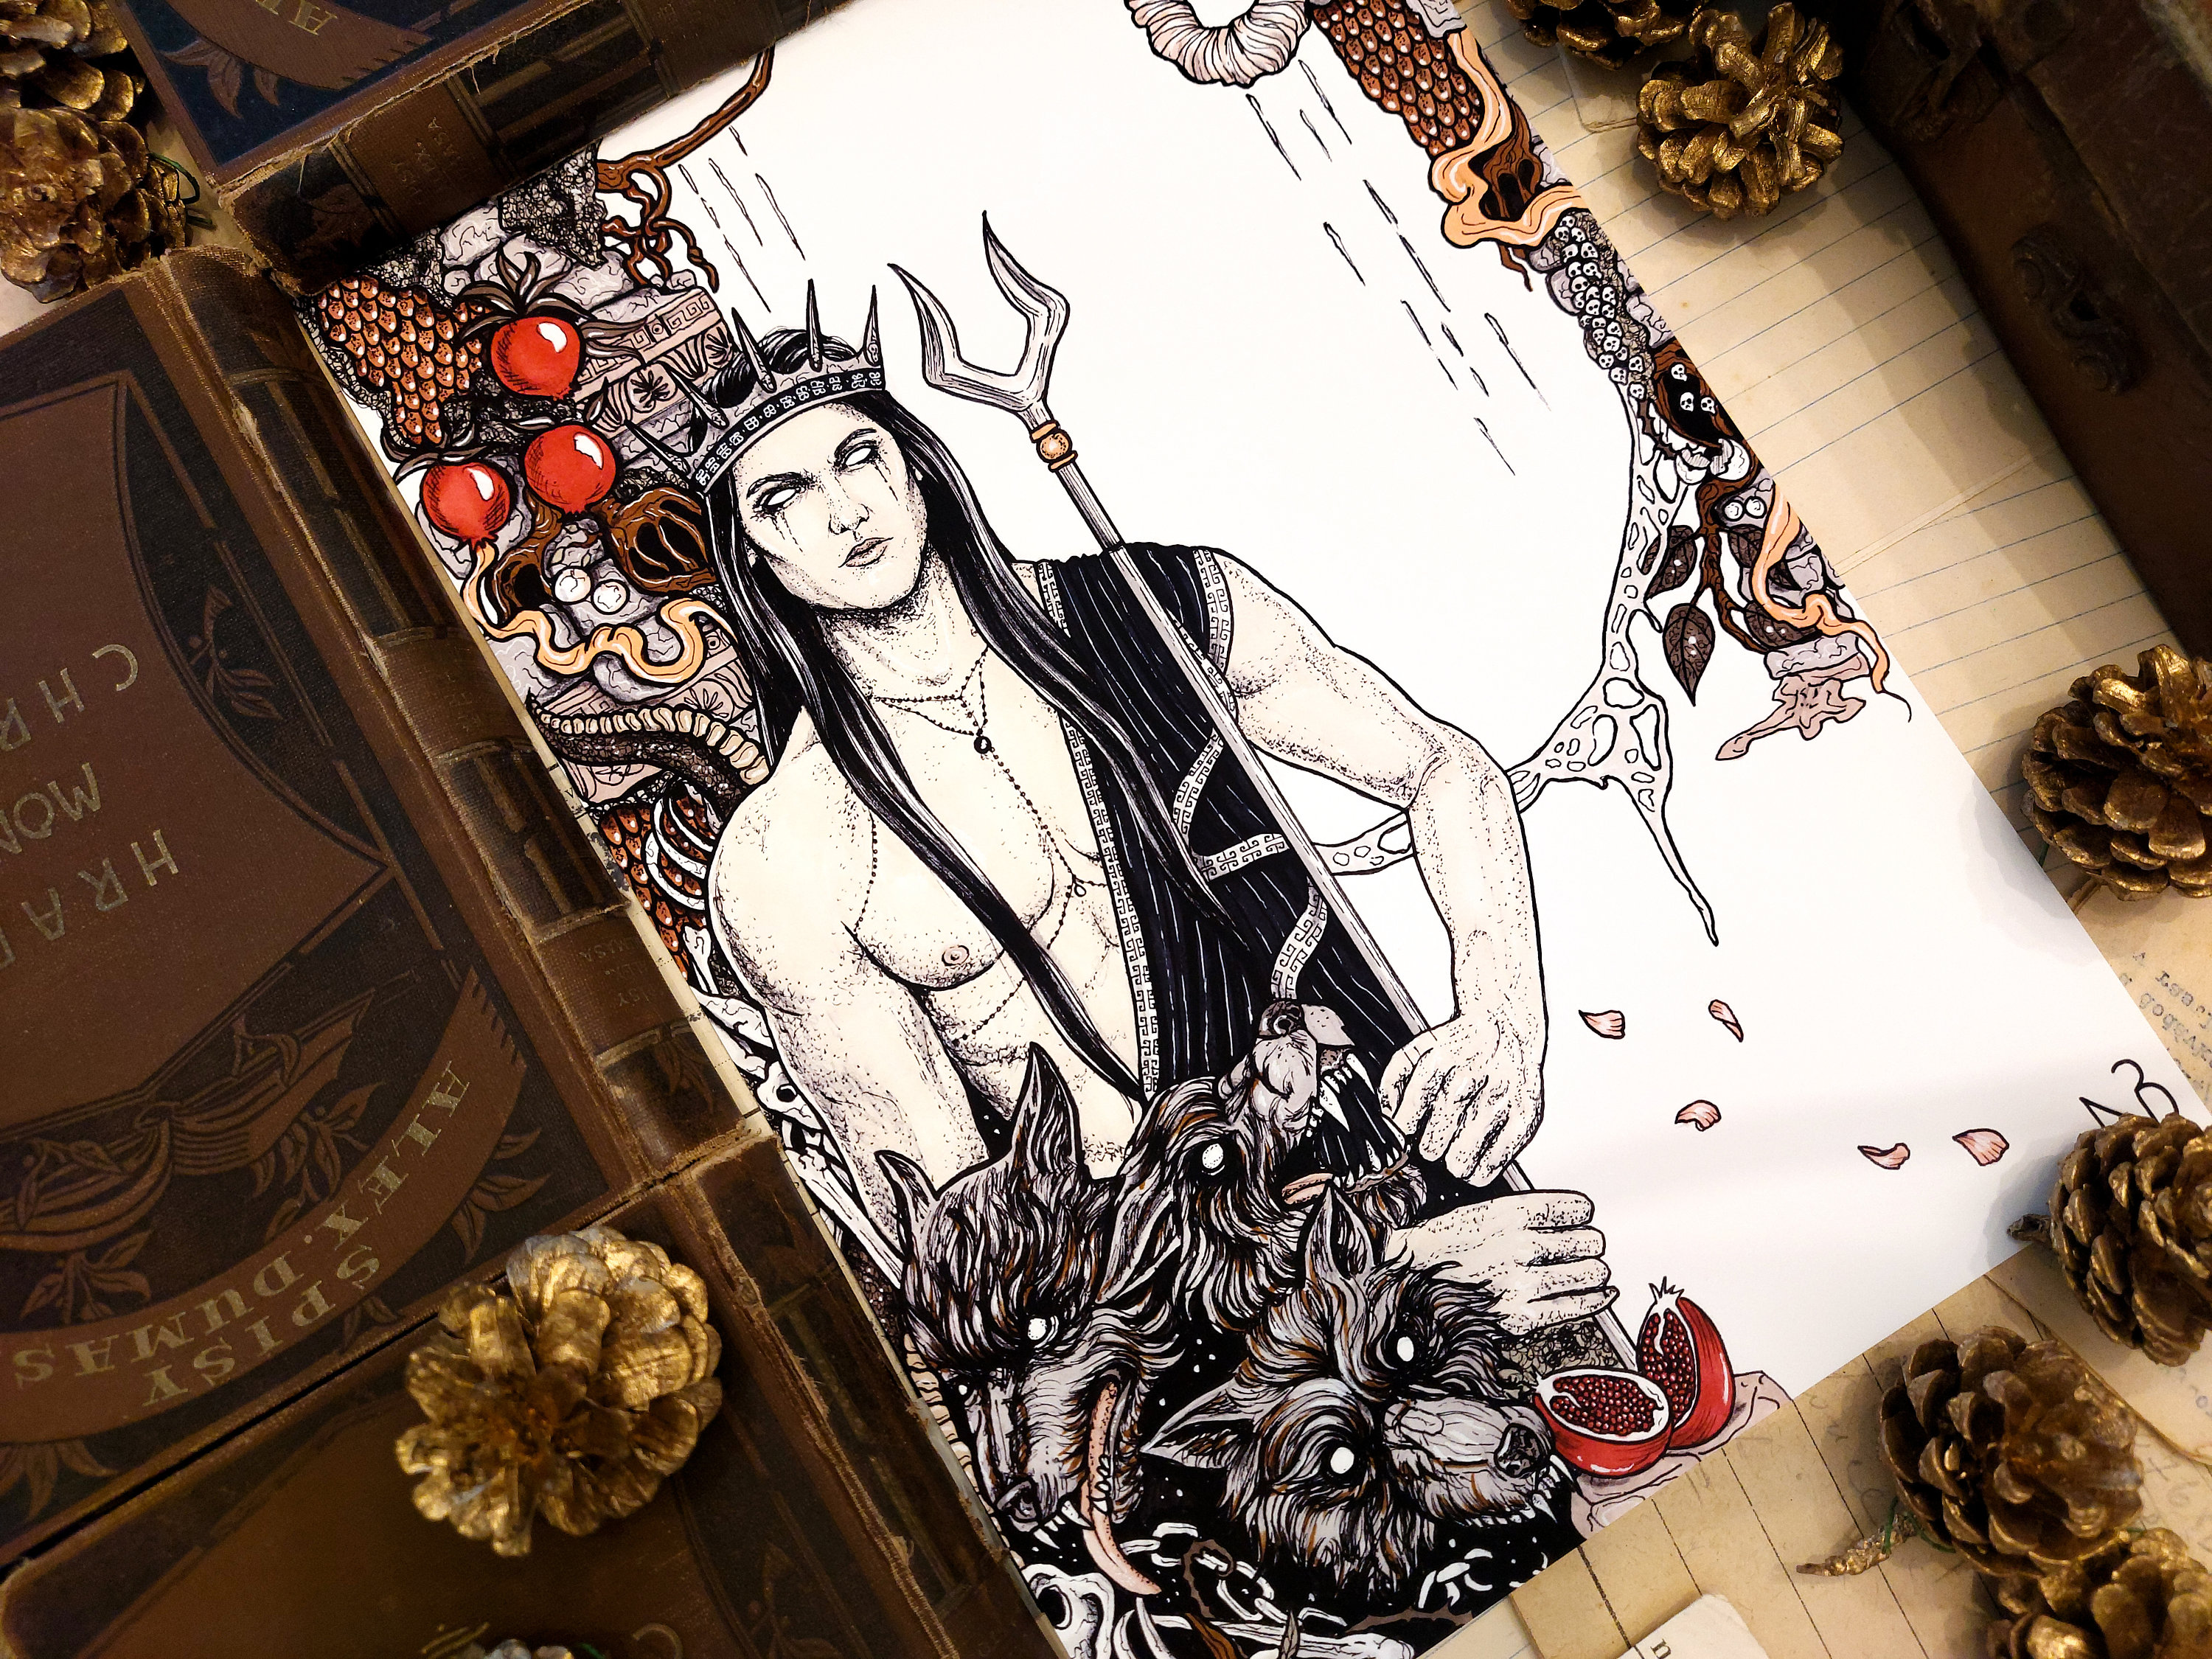 Manhwa style drawing of a greek male god with black hair and tanned skin  wearing a traditional dress and golden jewelry